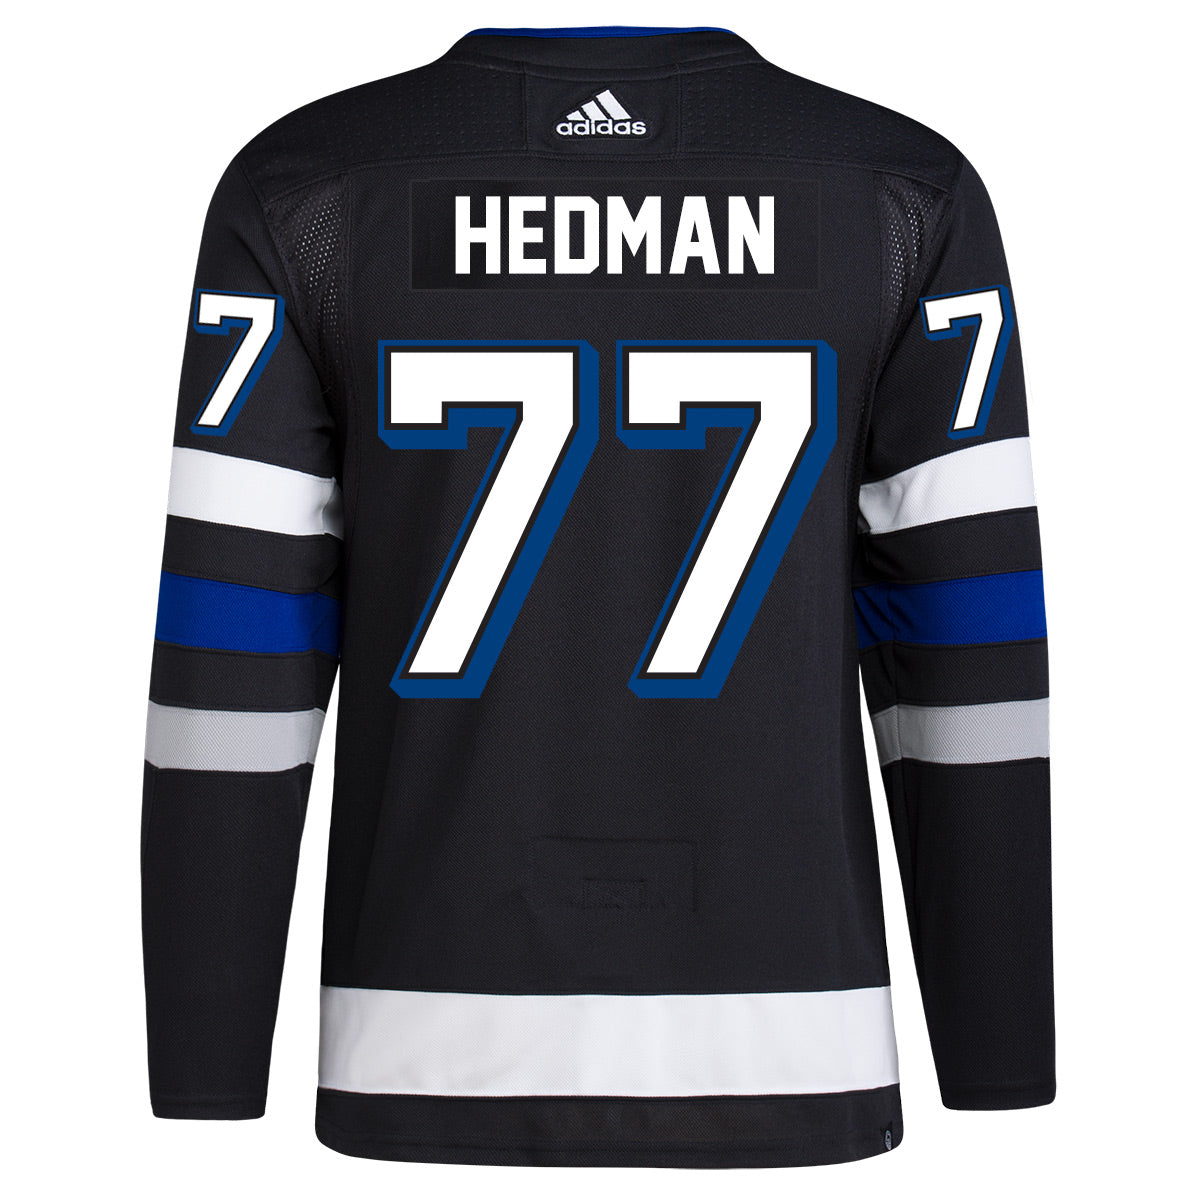 #77 HEDMAN Primegreen ADIZERO Lightning Third Jersey with Authentic Lettering